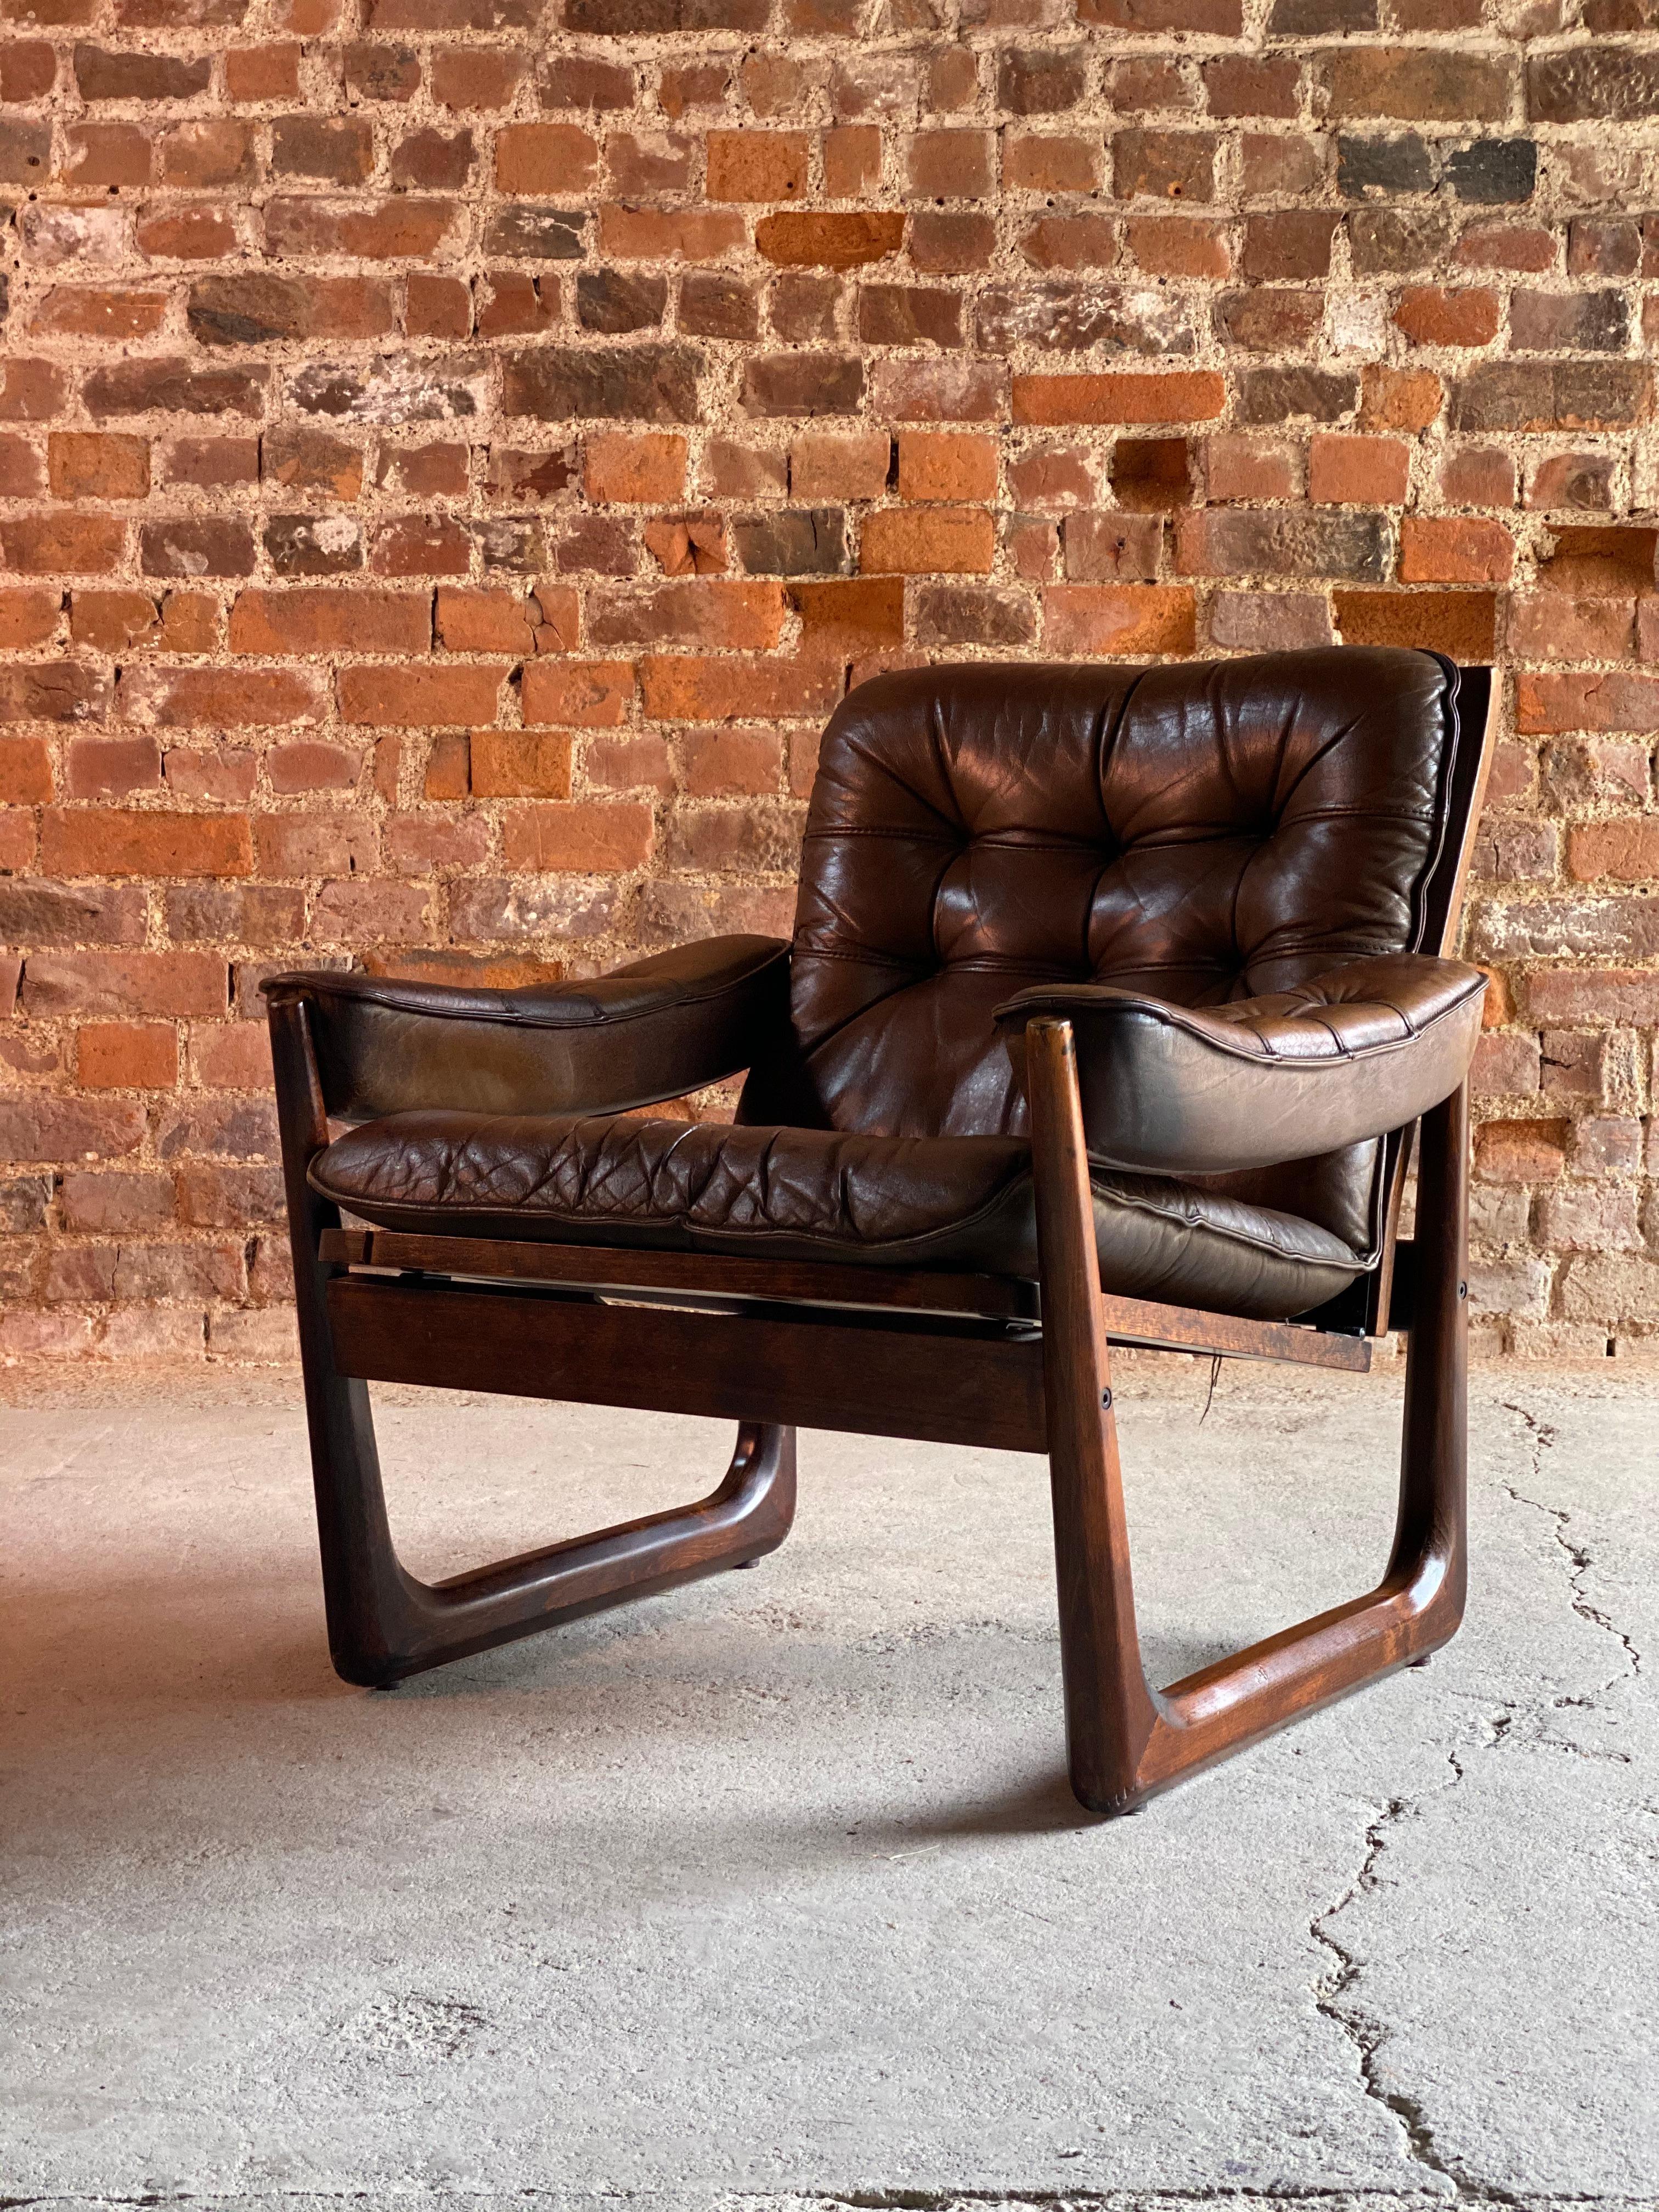 Midcentury Danish rosewood armchair with sled base rosewood circa 1970

Classic midcentury Danish design rosewood armchair circa 1970, the chair features deep soft brown tufted leather seat cushions and armrests on a rosewood sled base frame,